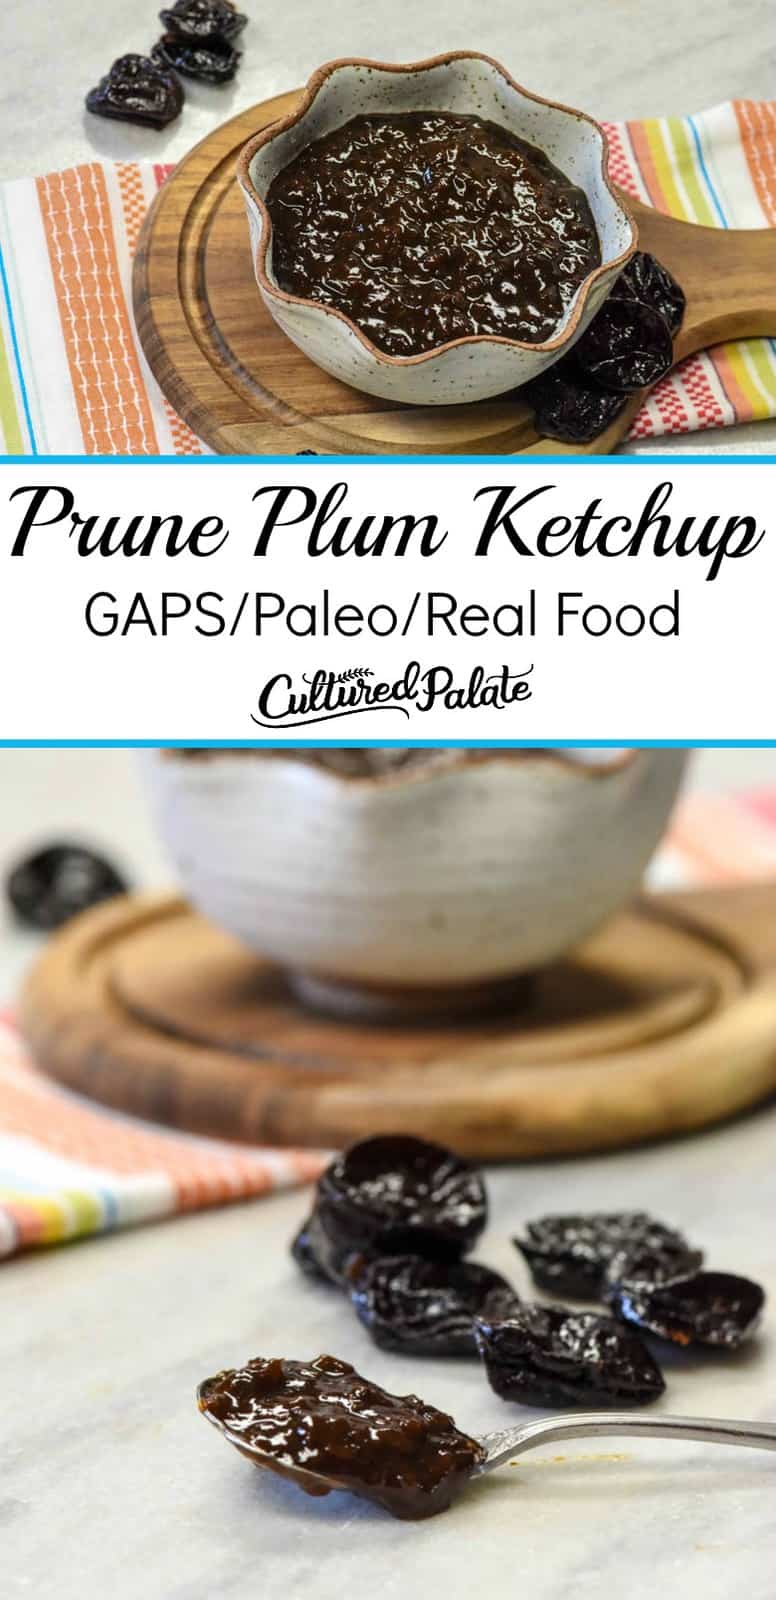 Prune Plum Ketchup in a bowl and then on a spoon with prunes around it with text overlay